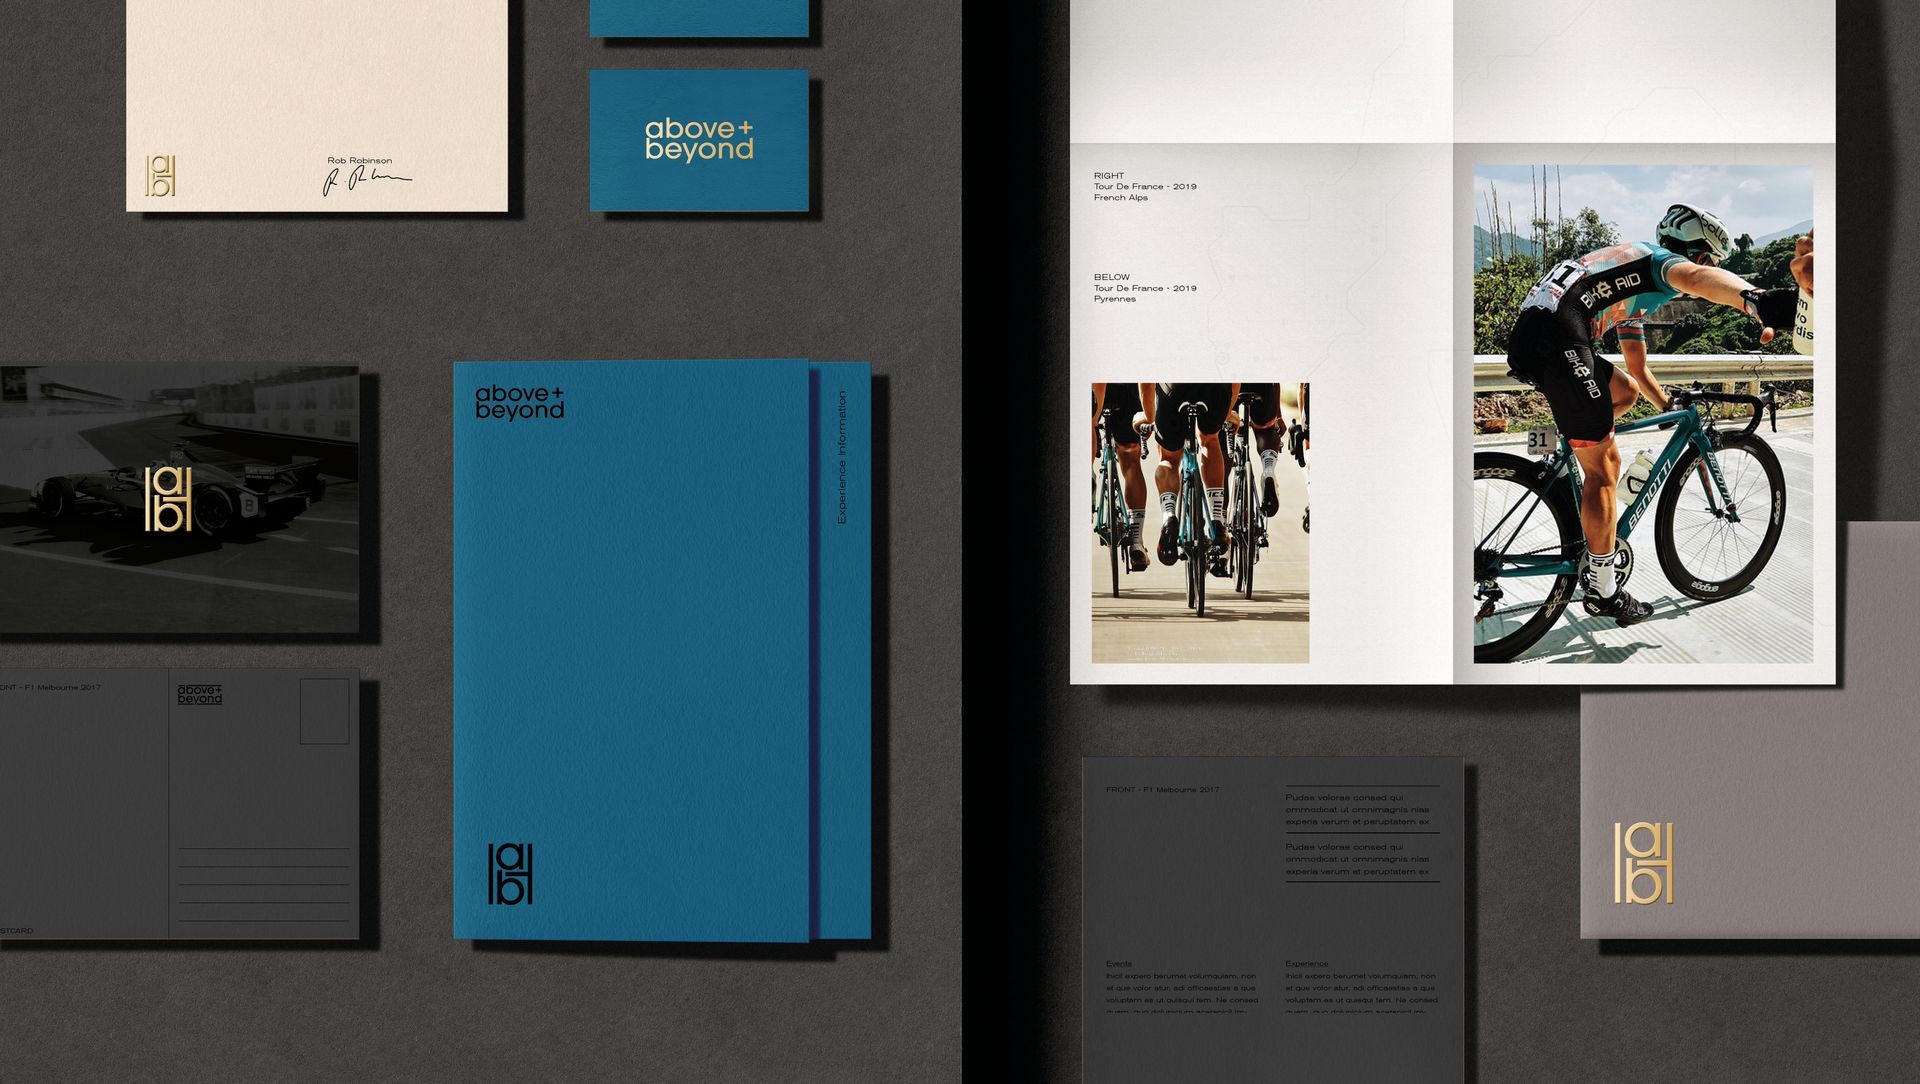 Above & Beyond - brand identity package